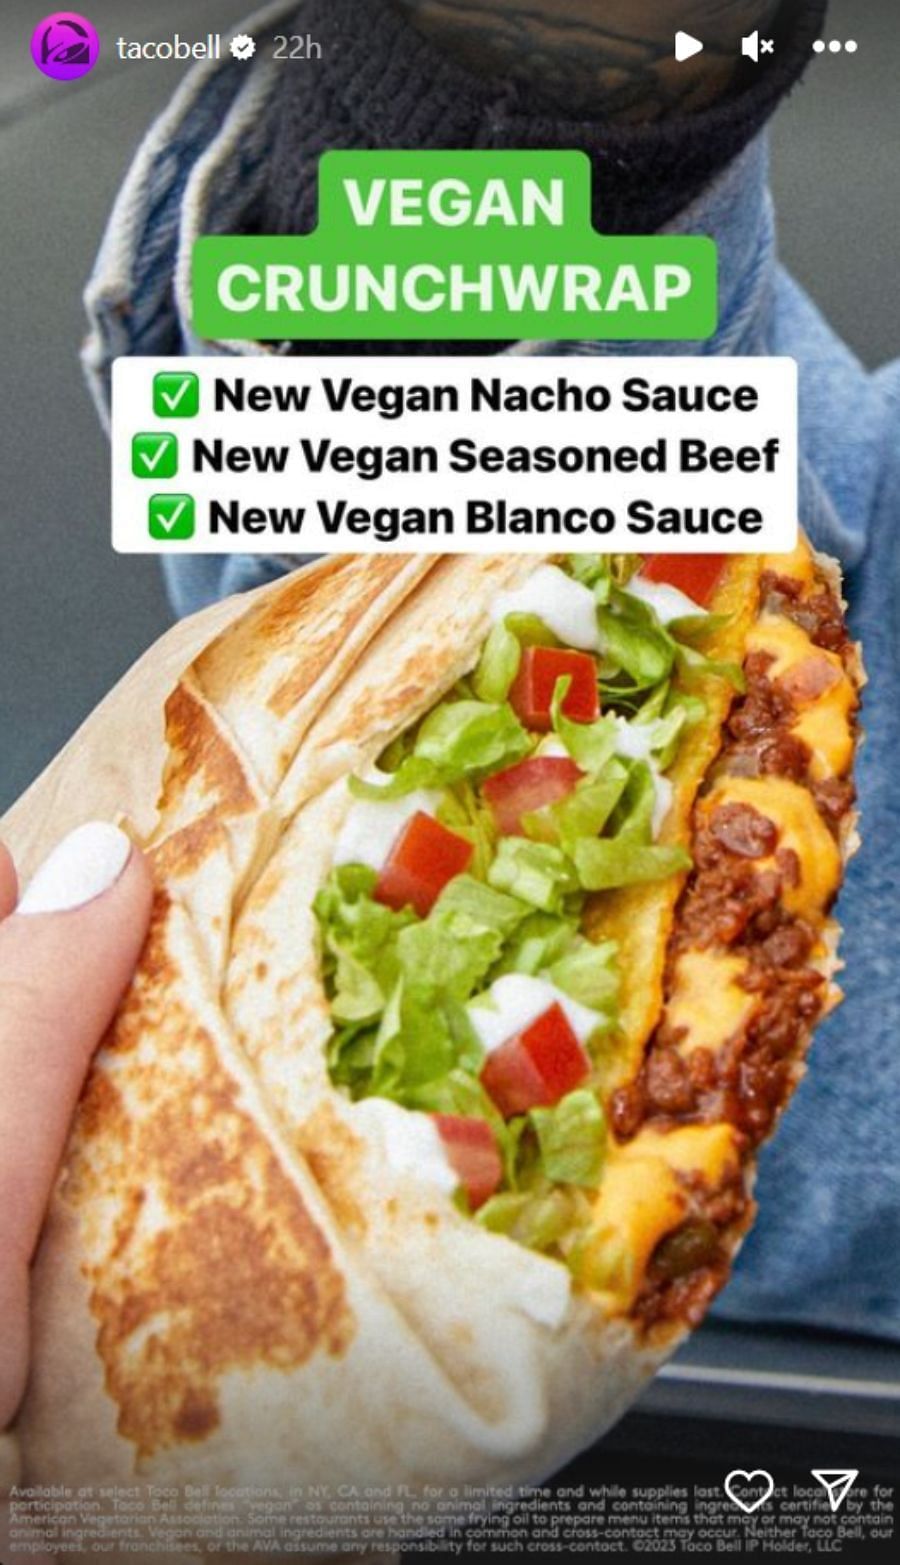 The franchise claims to have worked for years to perfect the Vegan Crunchwrap (Image via Instagram/@tacobell)